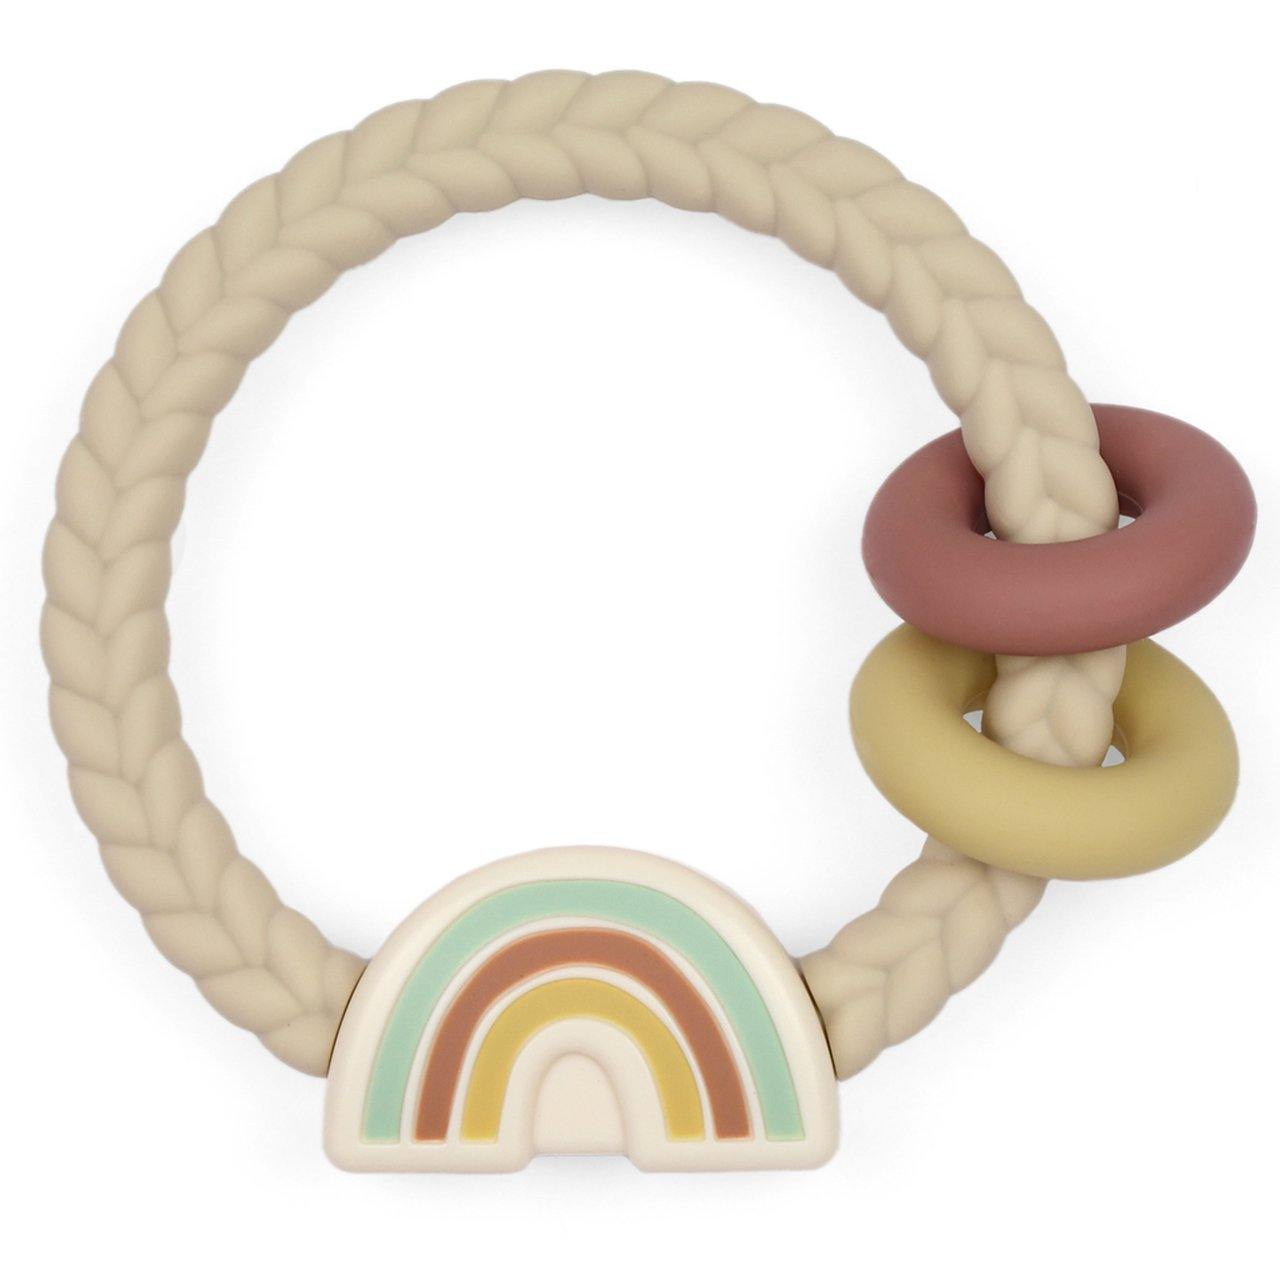 Itzy Ritzy Ritzy Rattle with Teething Rings - Neutral Rainbow